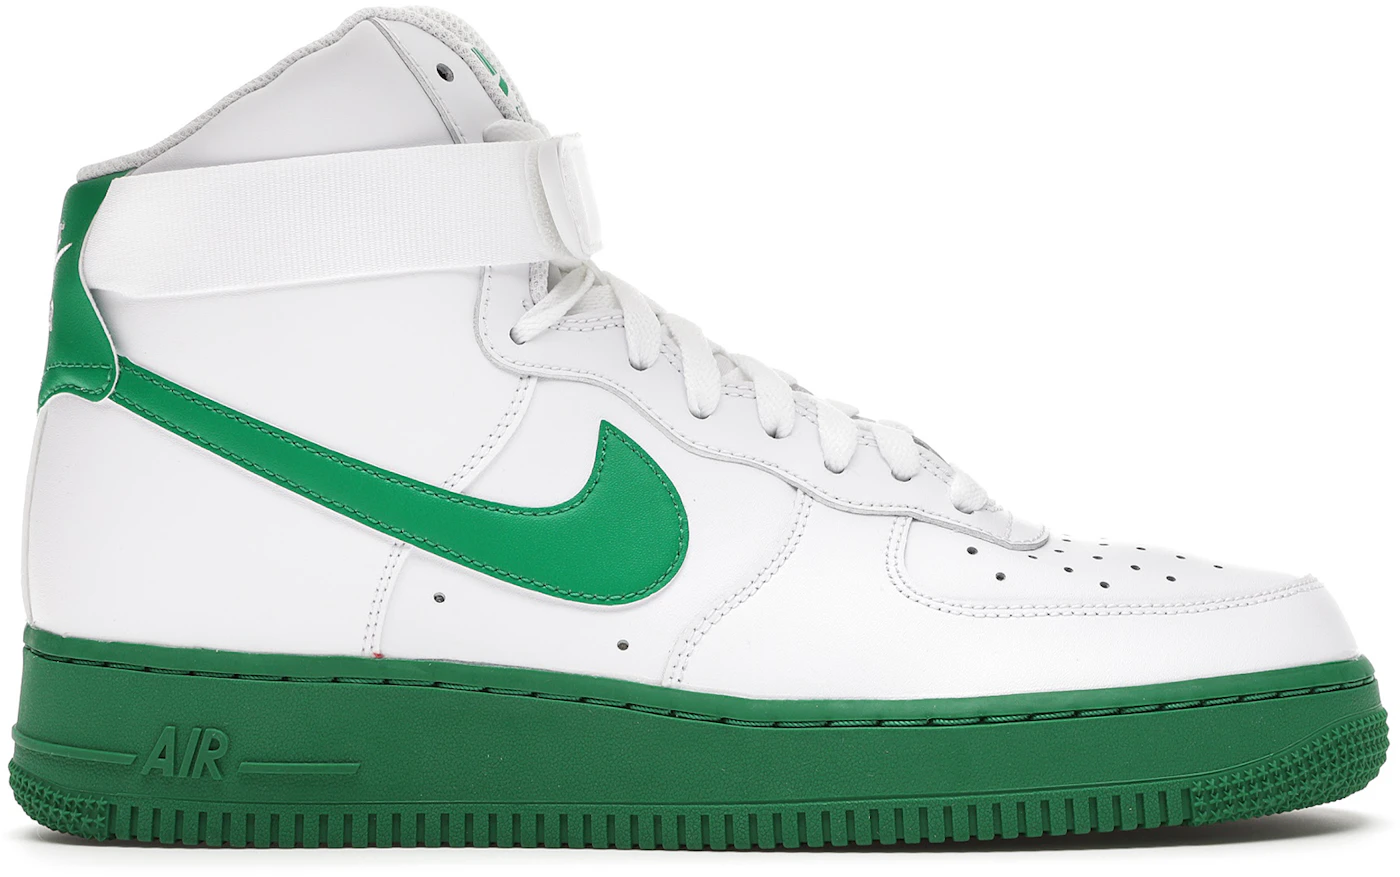 Air force 1 leather trainers Nike Green size 38 EU in Leather - 31559549